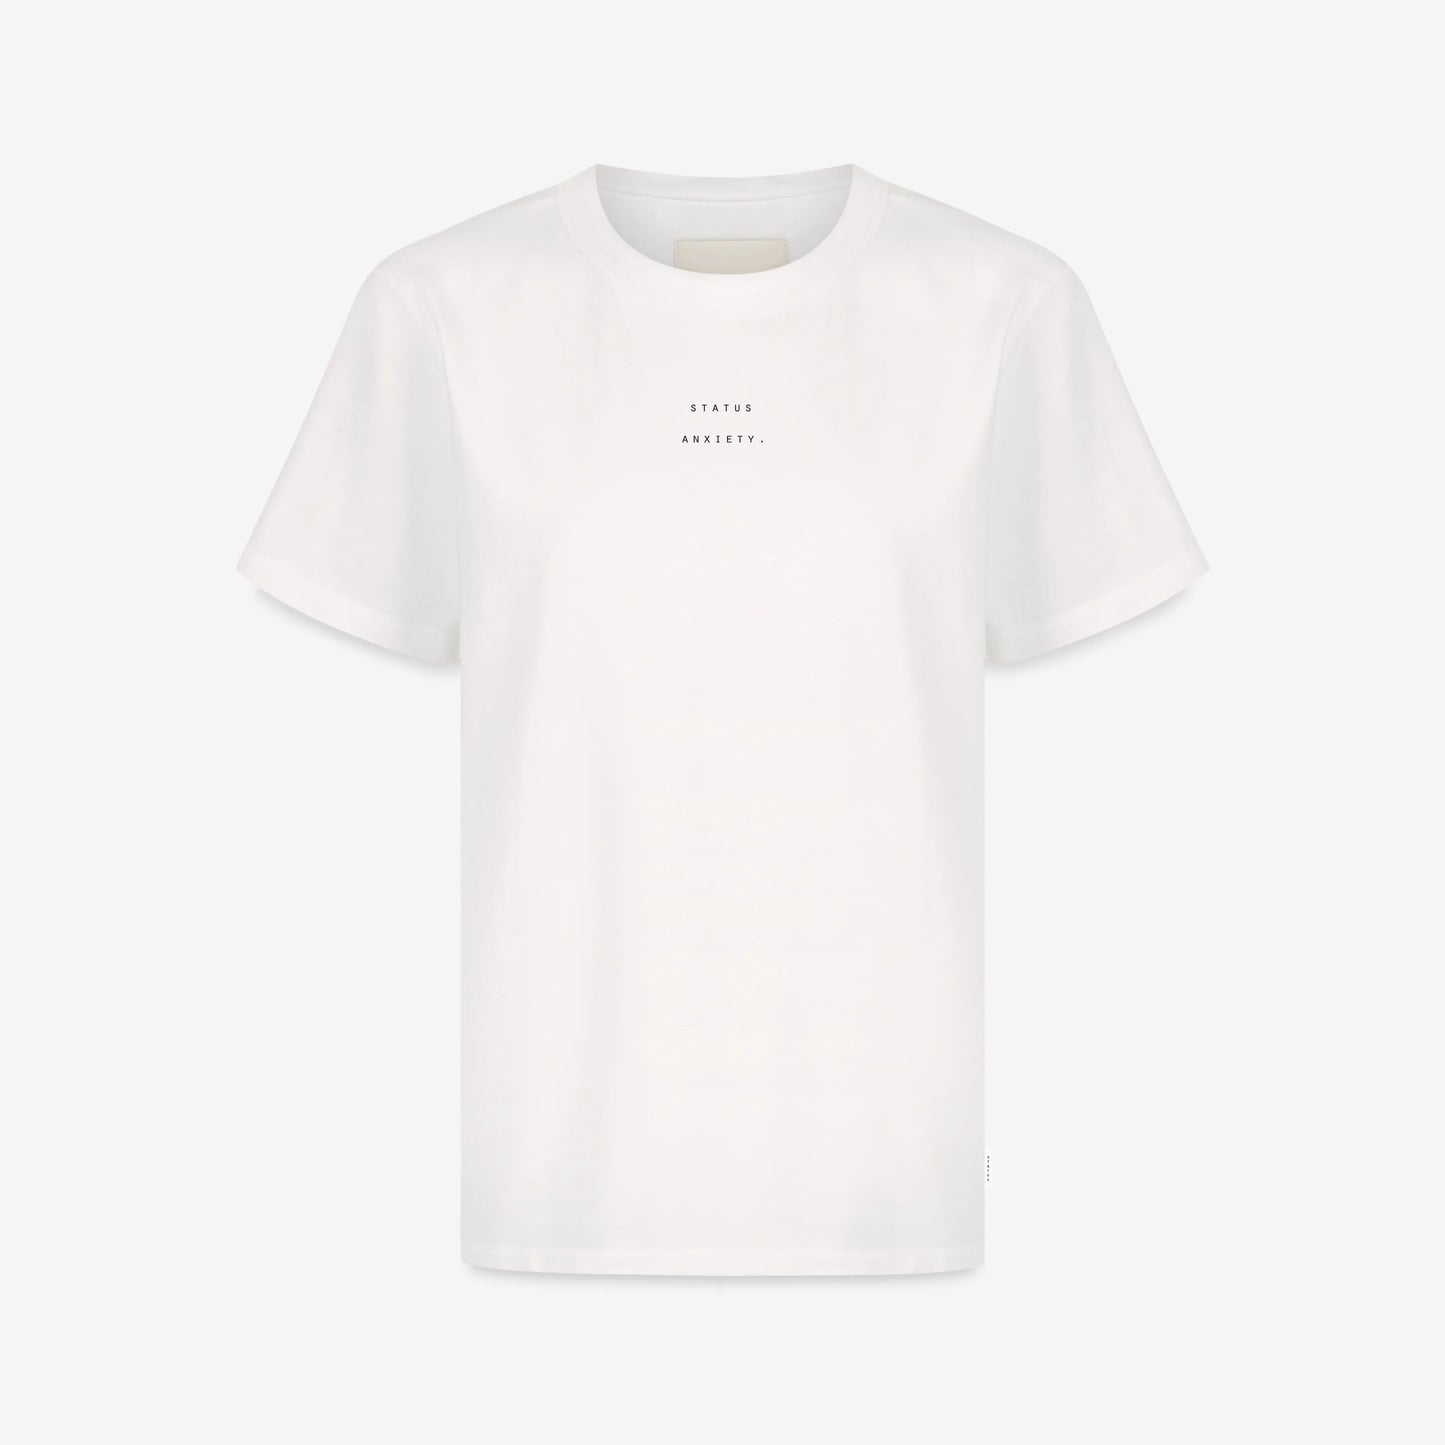 STATUS ANXIETY // Feels Right Tee OFF WHITE